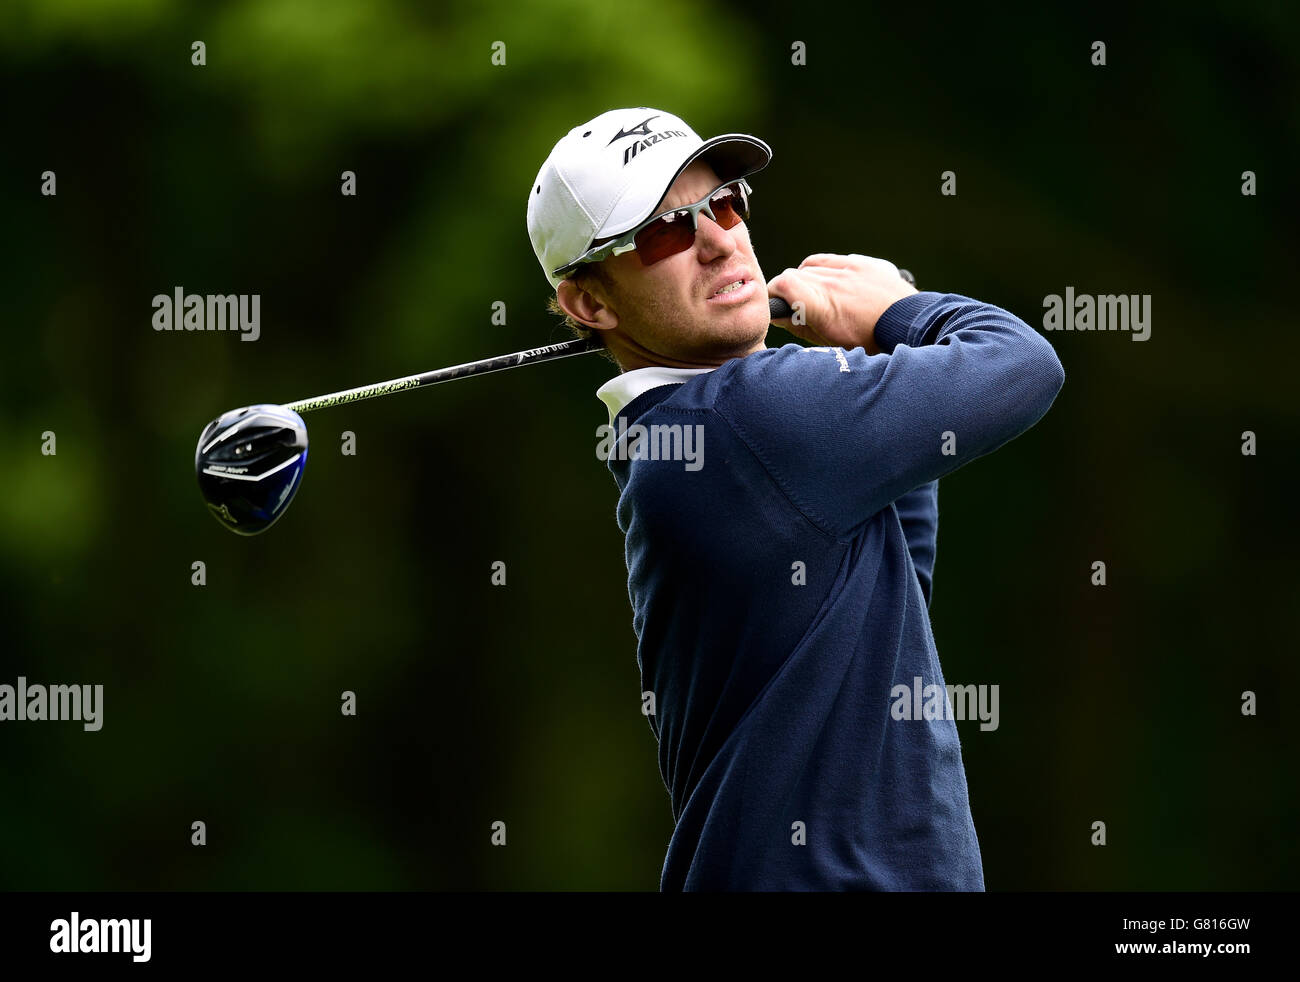 Sweden's Magnus A Carlsson during day two of the 2015 BMW PGA Championship at the Wentworth Golf Club, Surrey. PRESS ASSOCIATION Photo. Picture date: Friday May 22, 2015. See PA story GOLF Wentworth. Photo credit should read: Adam Davy/PA Wire. RESTRICTIONS: . No commercial use. No false commercial association. No video emulation. No manipulation of images. Stock Photo